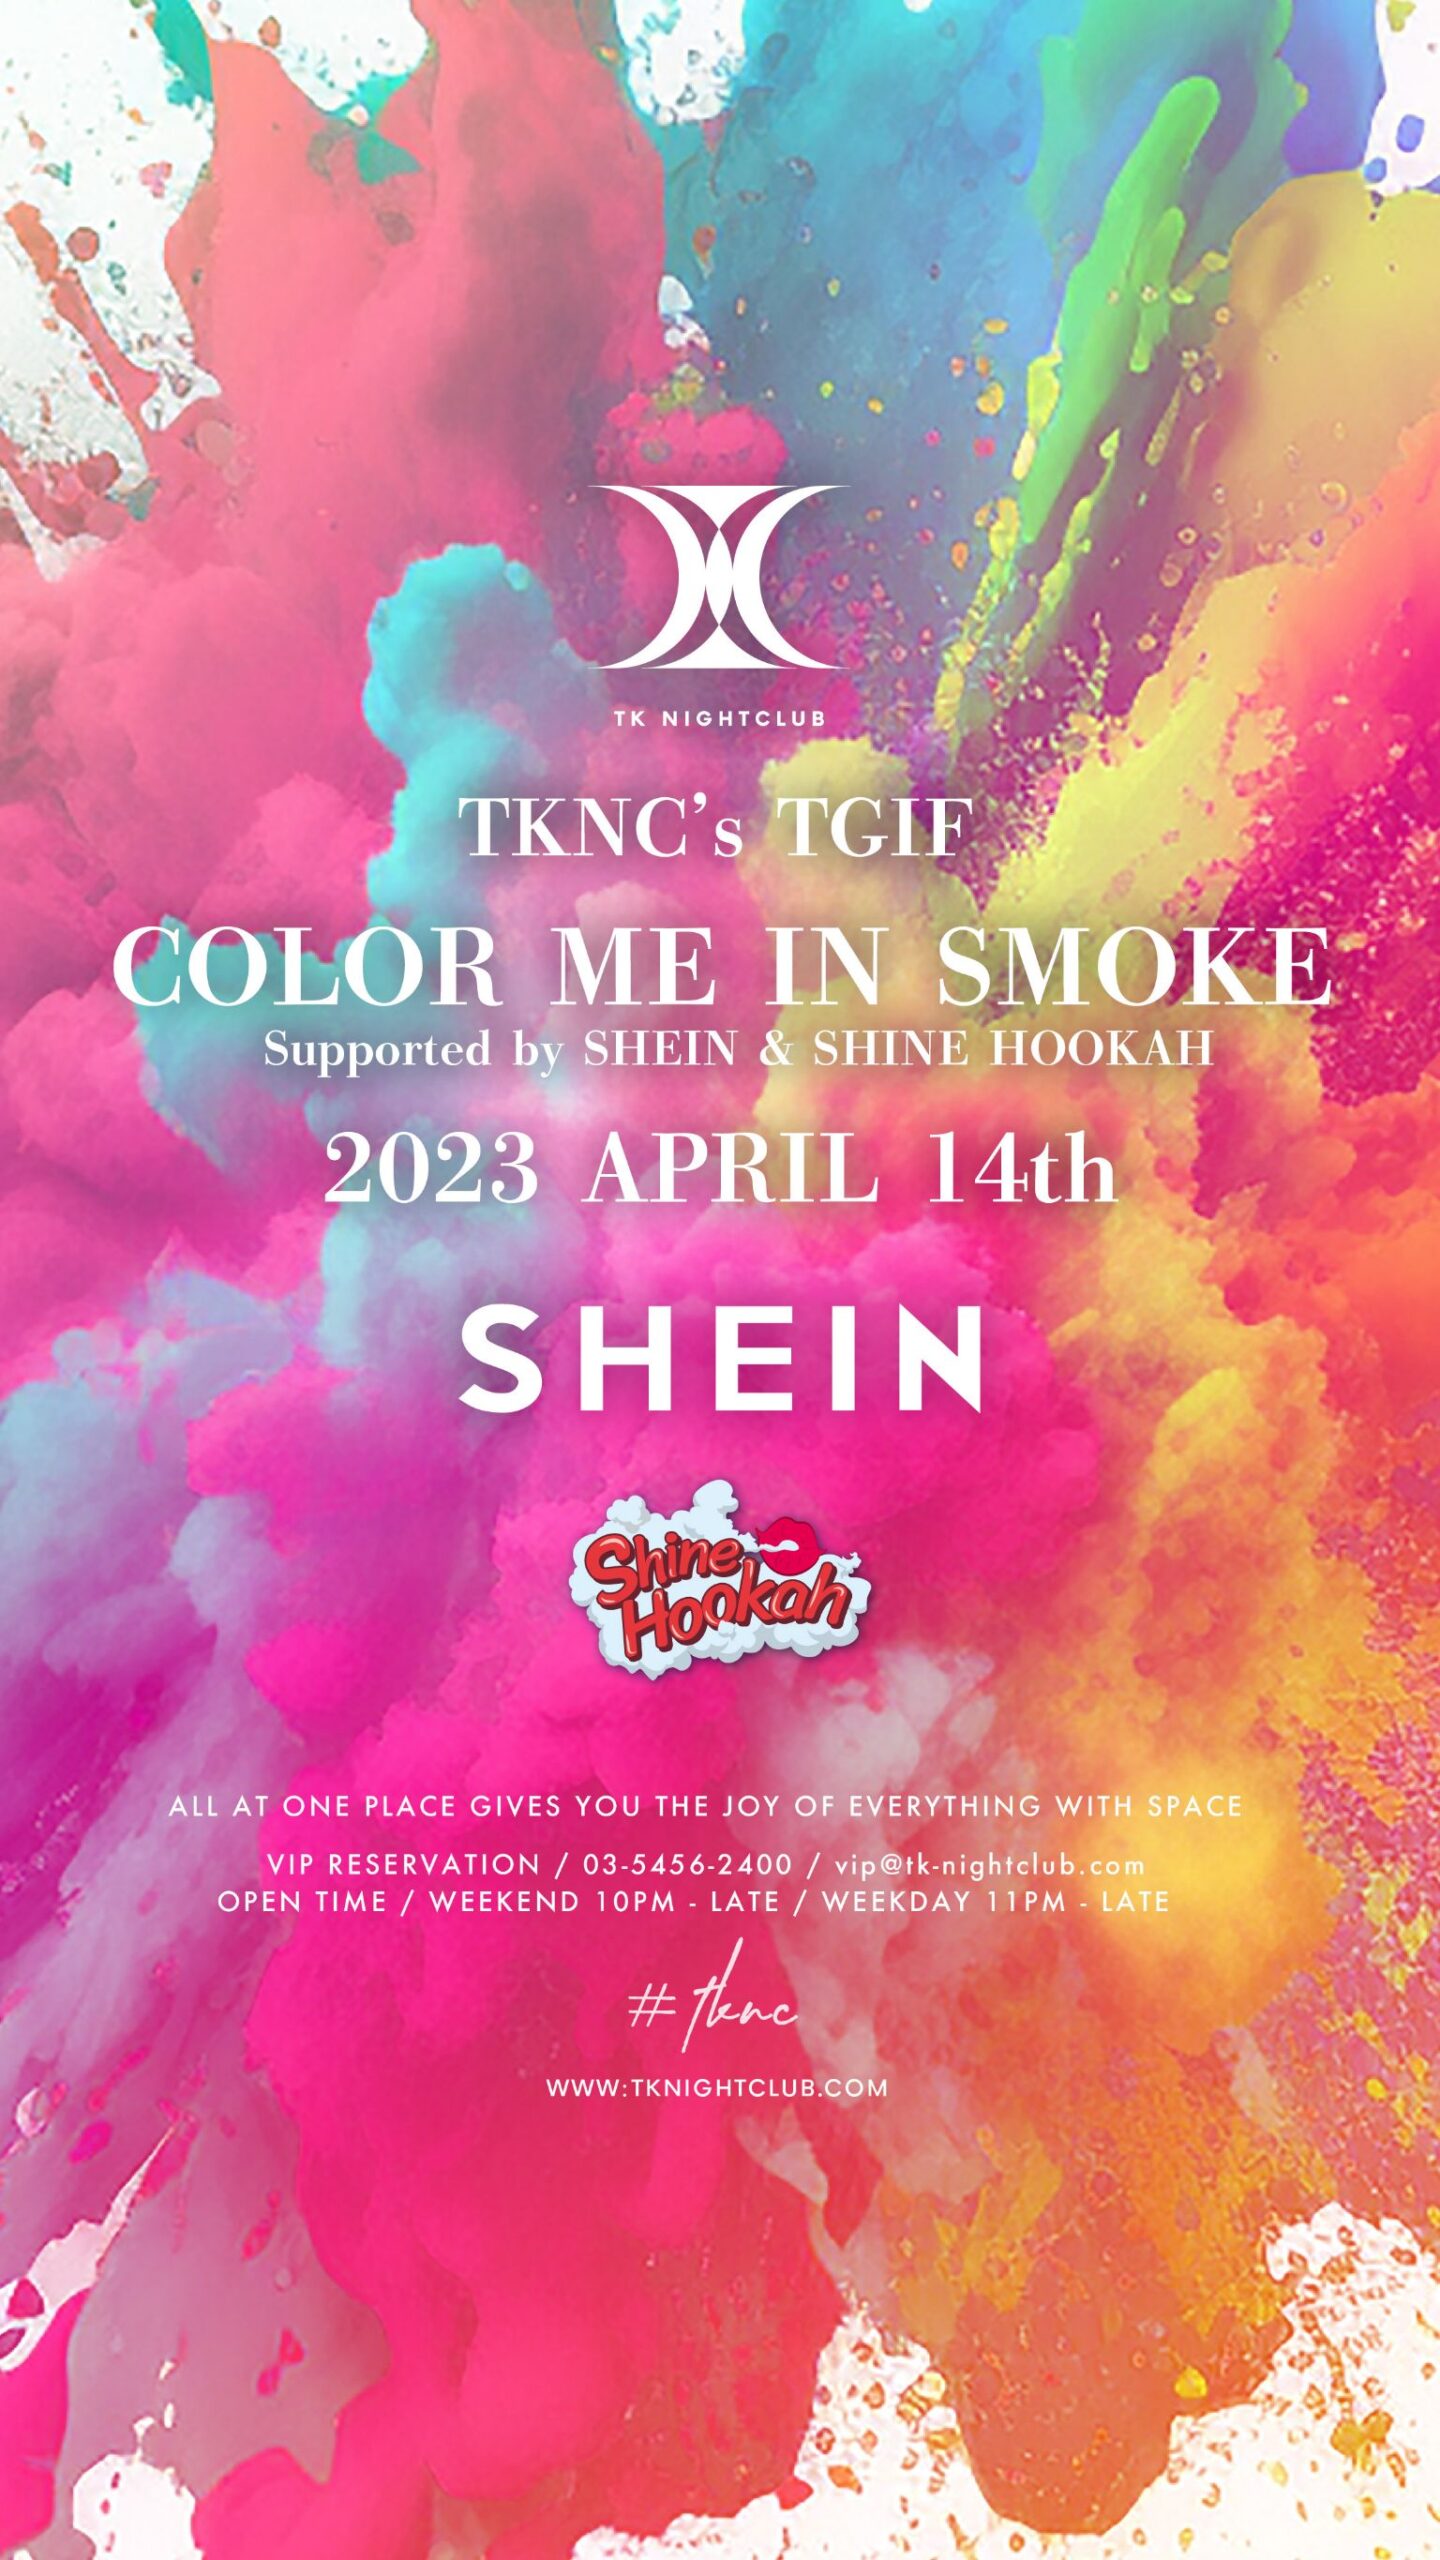 TKNC’s TGIF Color me in Smoke Supported by SHEIN & SHINE HOOKA